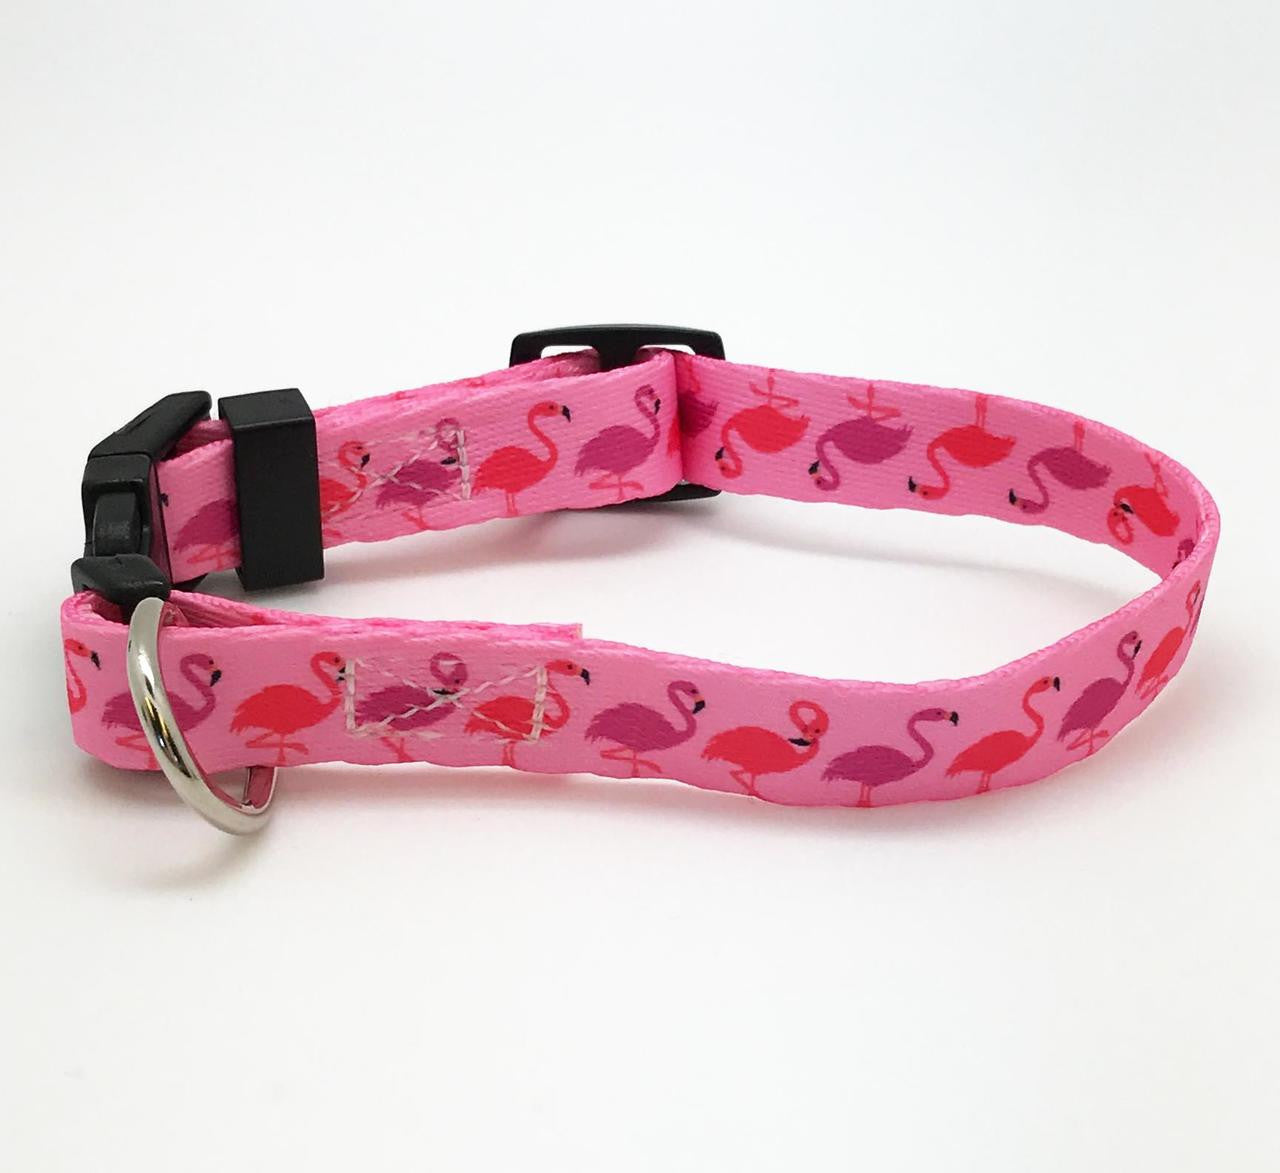 Dog Collar 5/8" wide with Flamingos in pink and lavender on pink webbing